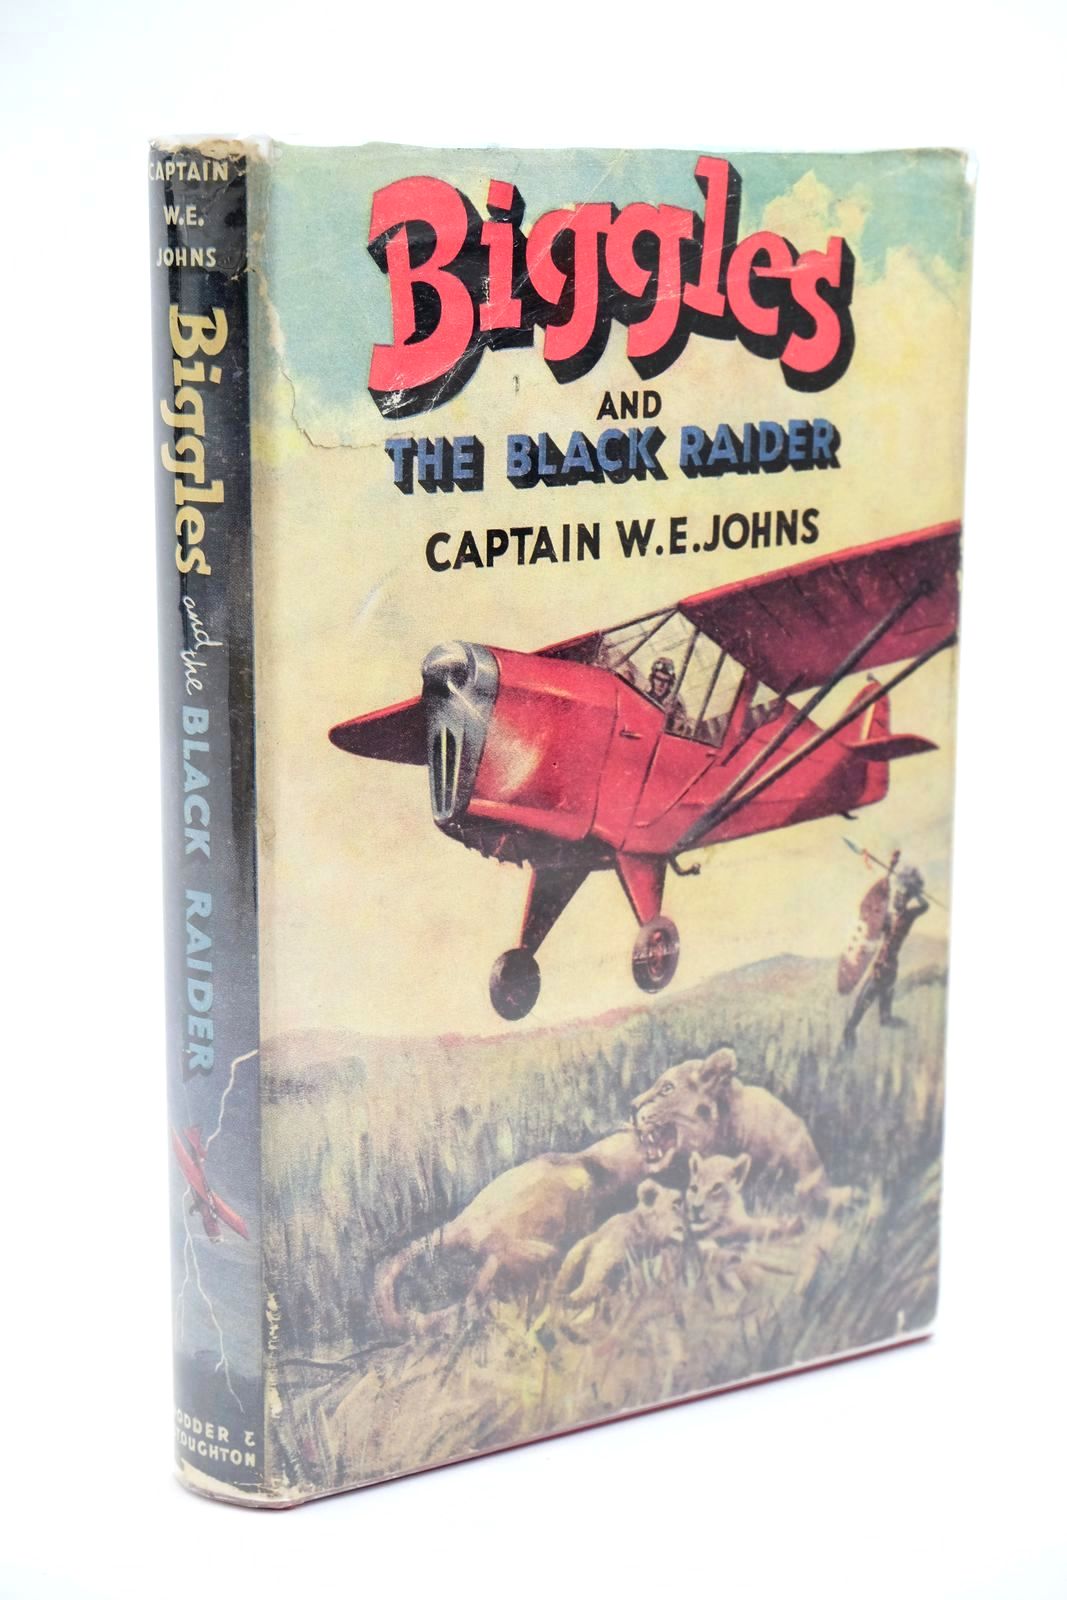 Photo of BIGGLES AND THE BLACK RAIDER written by Johns, W.E. illustrated by Stead,  published by Hodder & Stoughton (STOCK CODE: 1323252)  for sale by Stella & Rose's Books